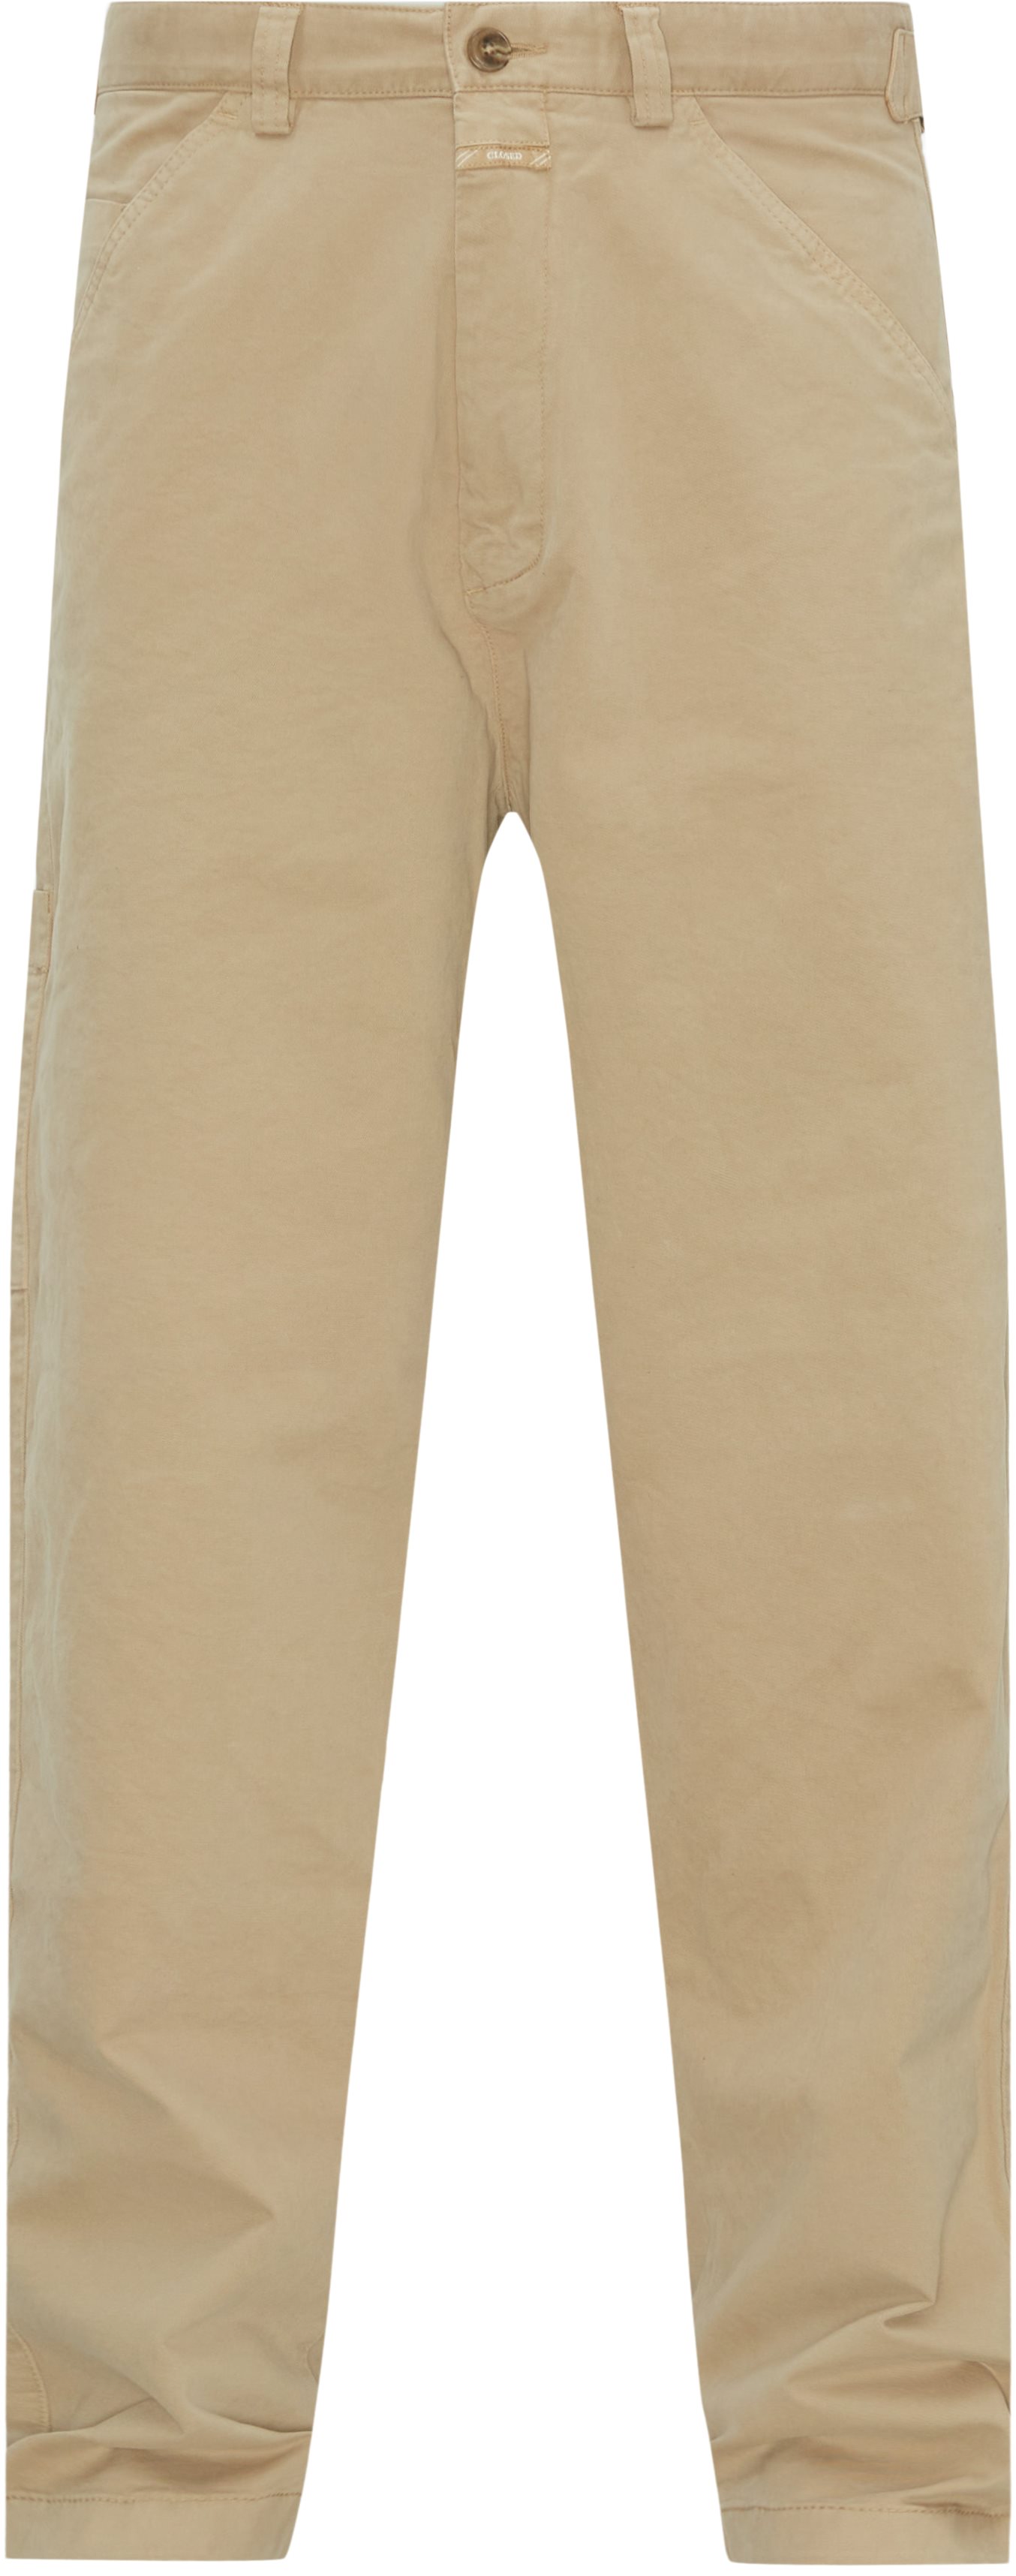 Closed Trousers C32214-301-30 DOVER TAPERED Sand